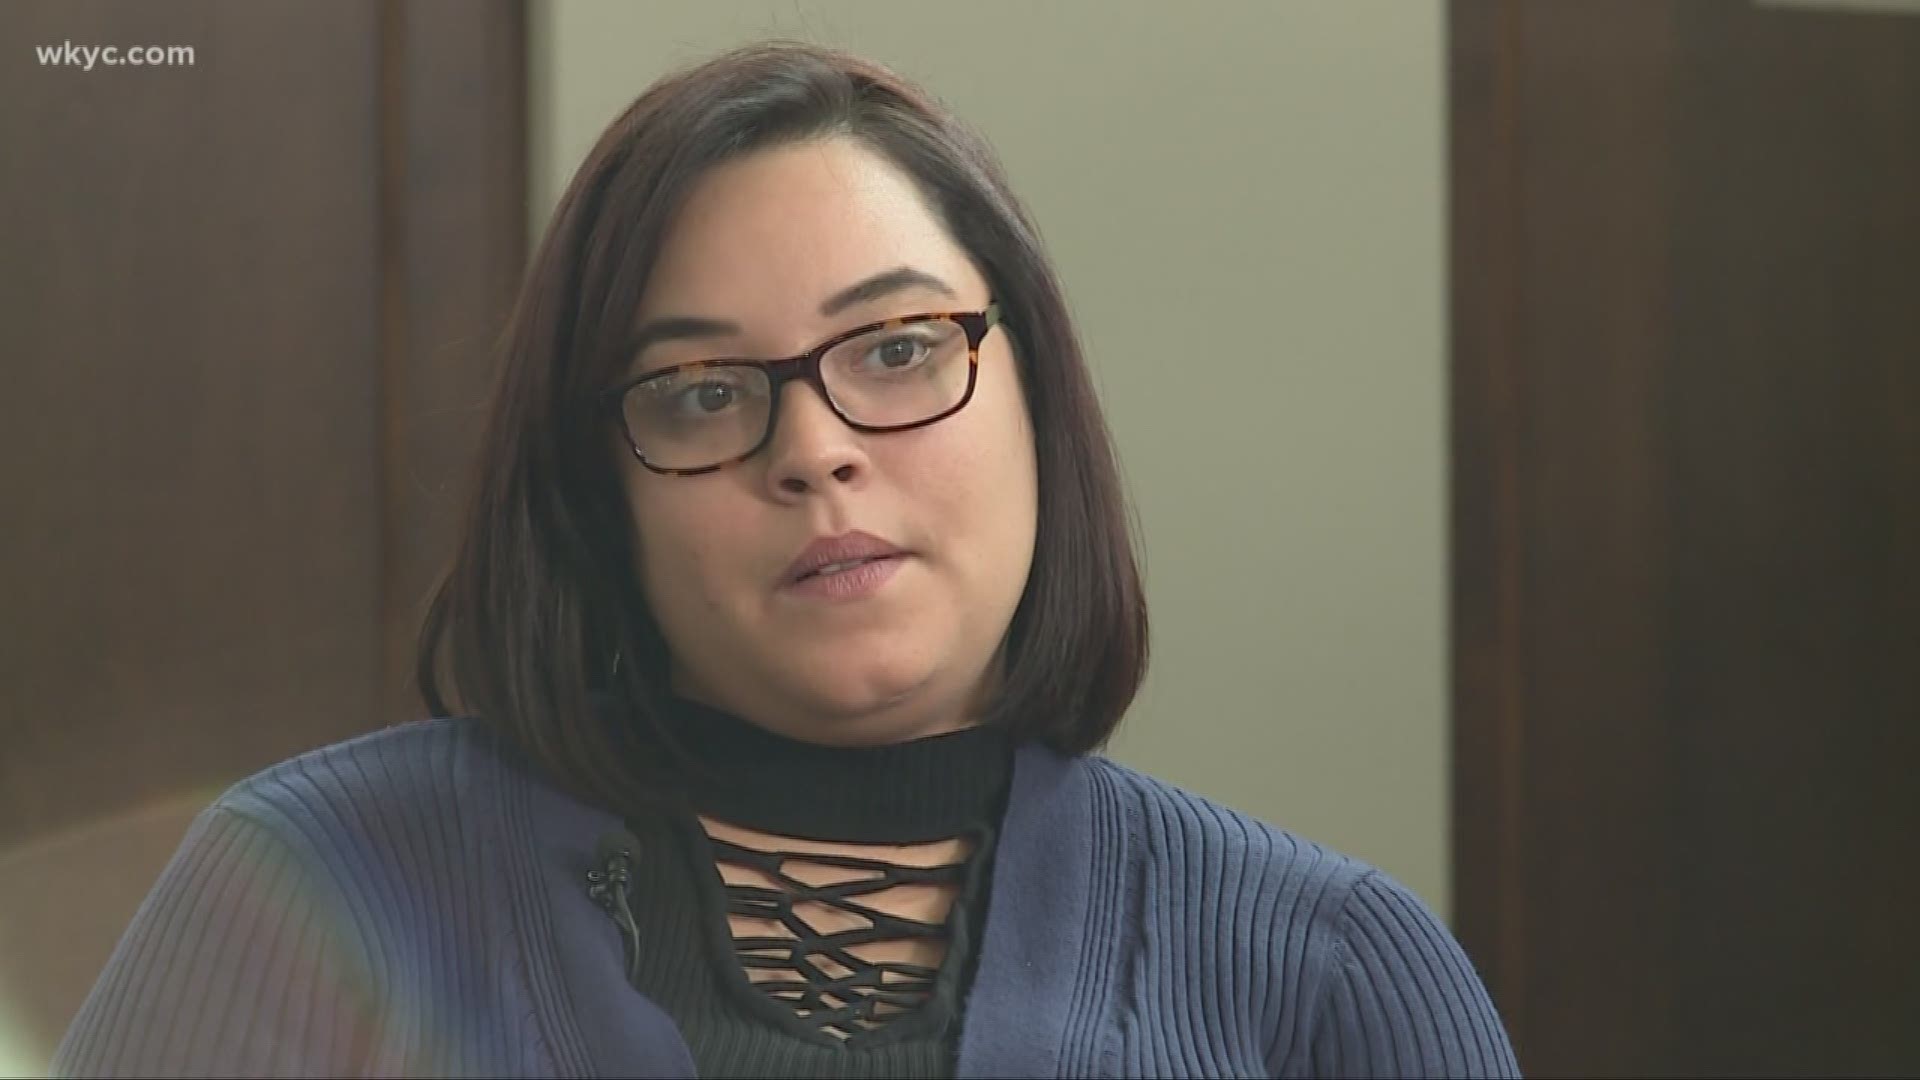 Gina DeJesus announces Center for Missing, Abducted and Exploited Children and Adults